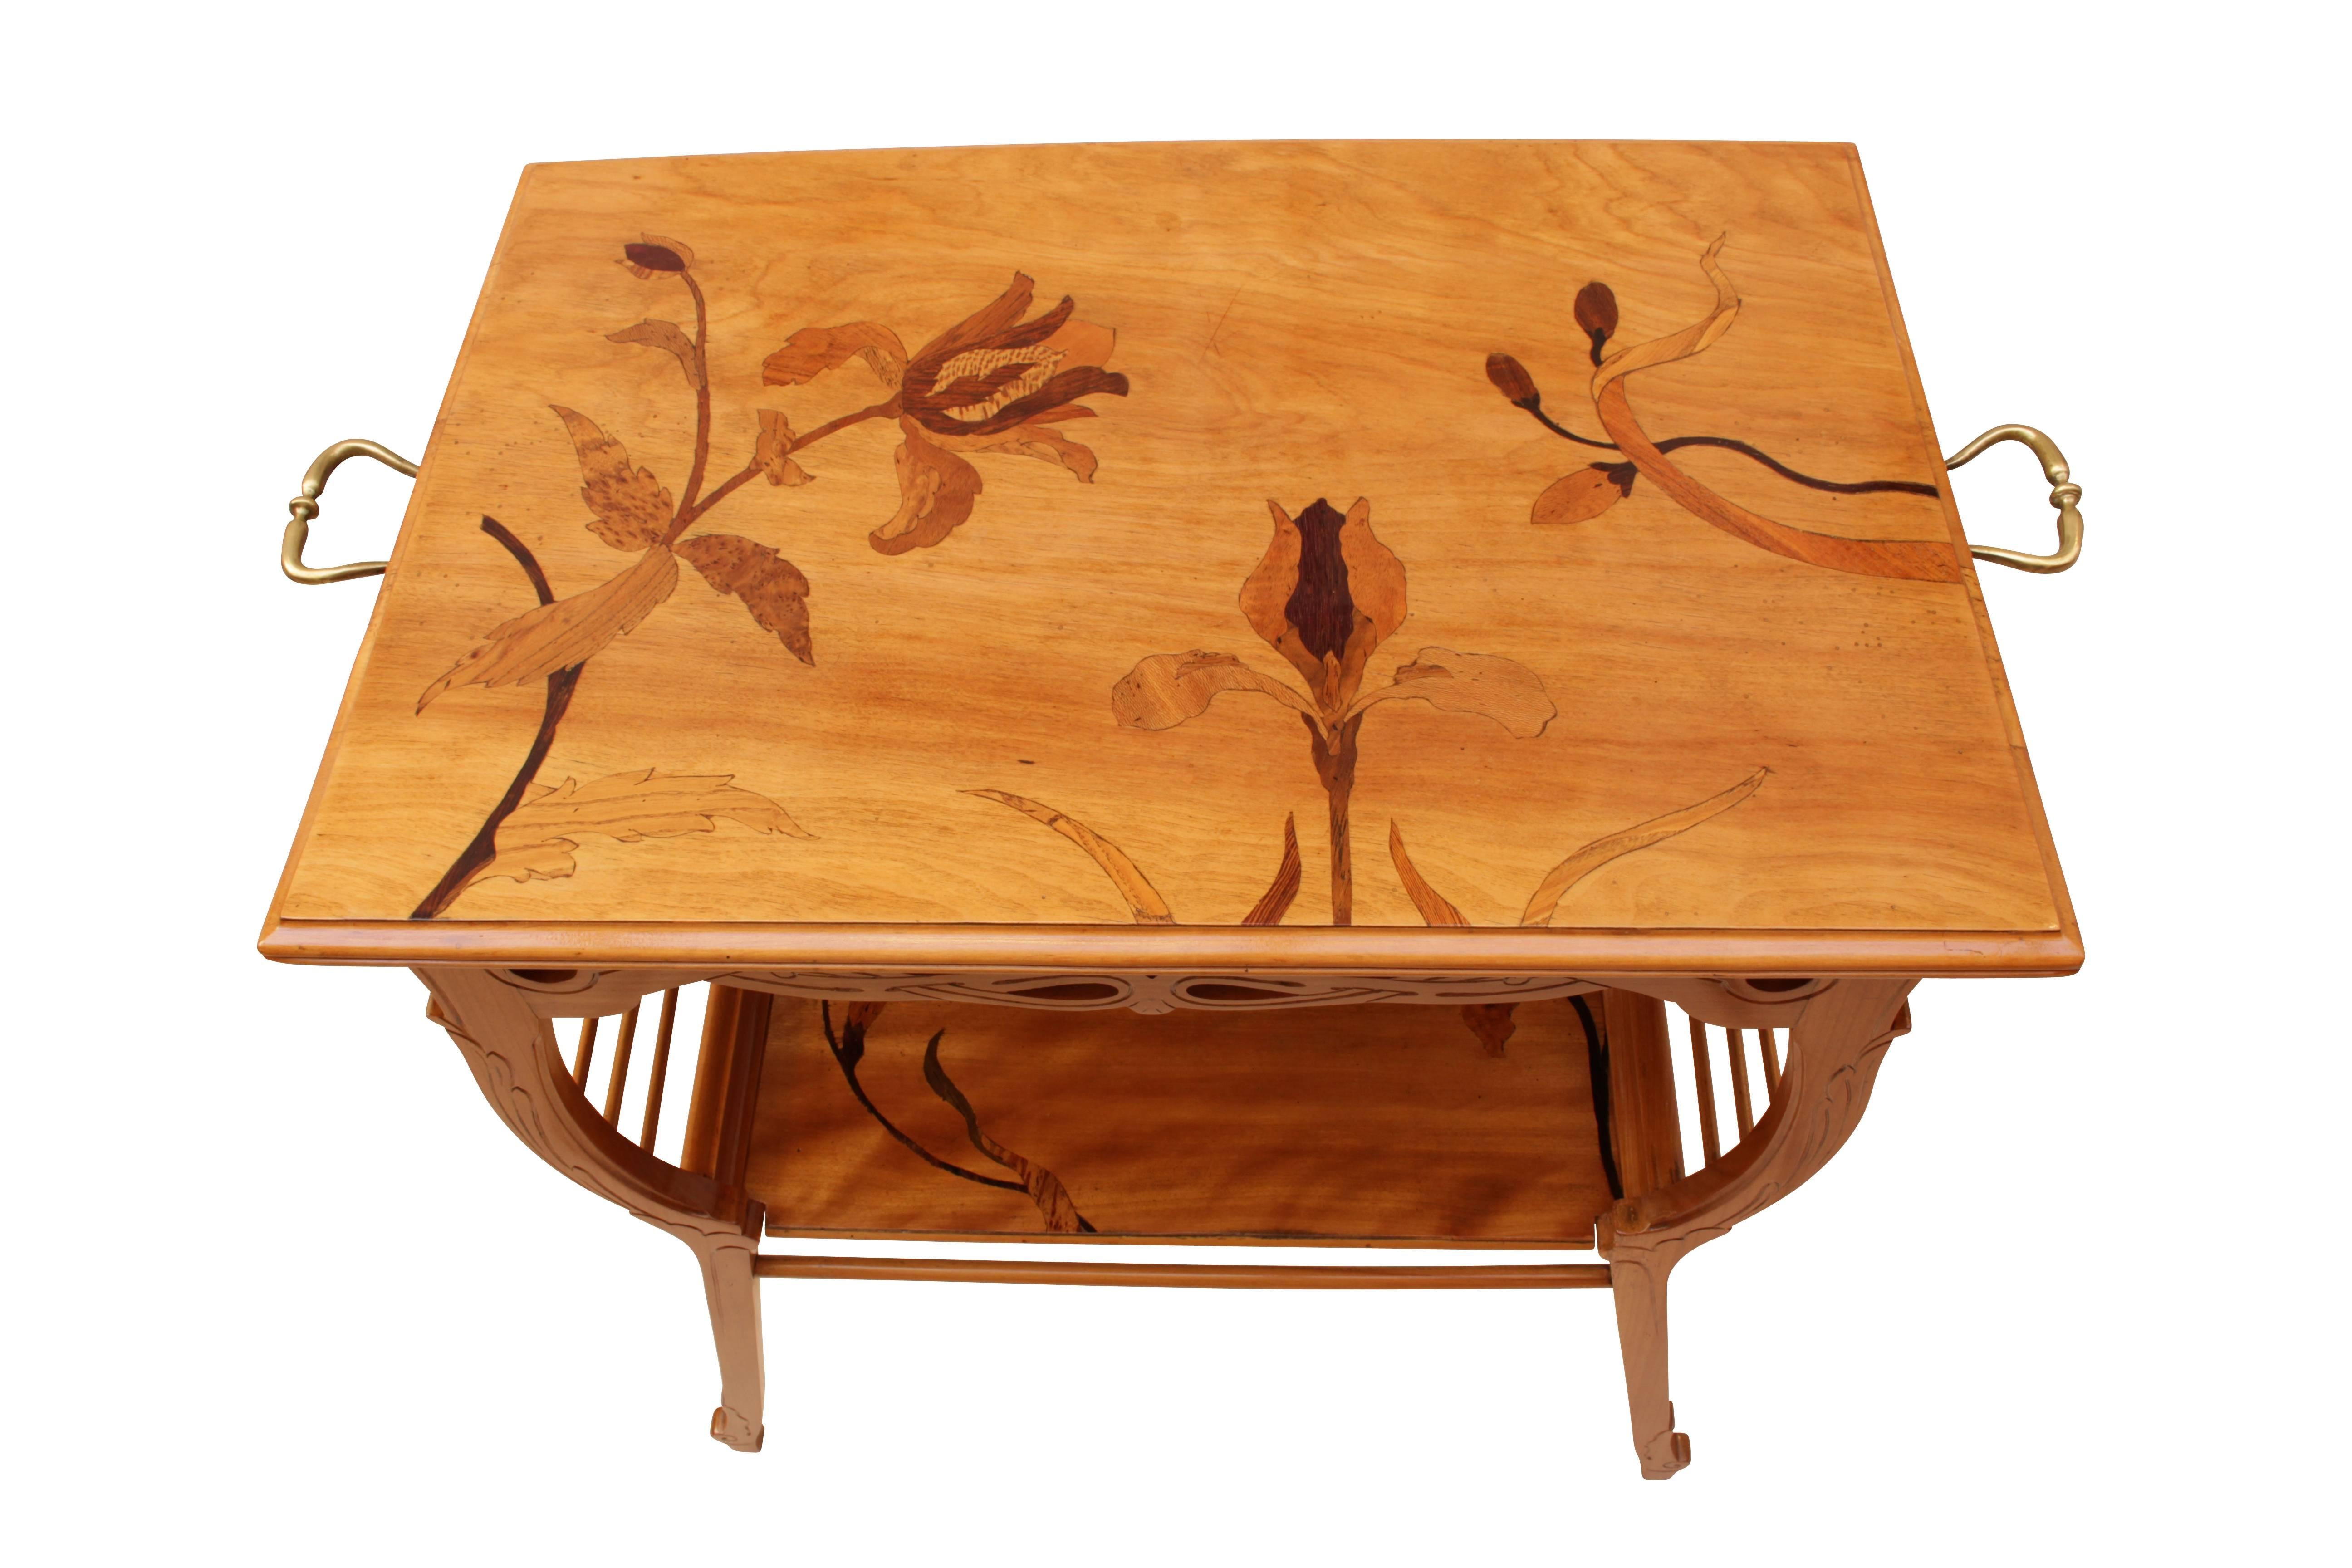 Very nice Art Nouveau side table from the period, circa 1900 from France. The delicate legs are made of cheerywood, the plates are veneered with walnut in which wonderful marquetry from different fruit trees are. On the sides are brass handles. The